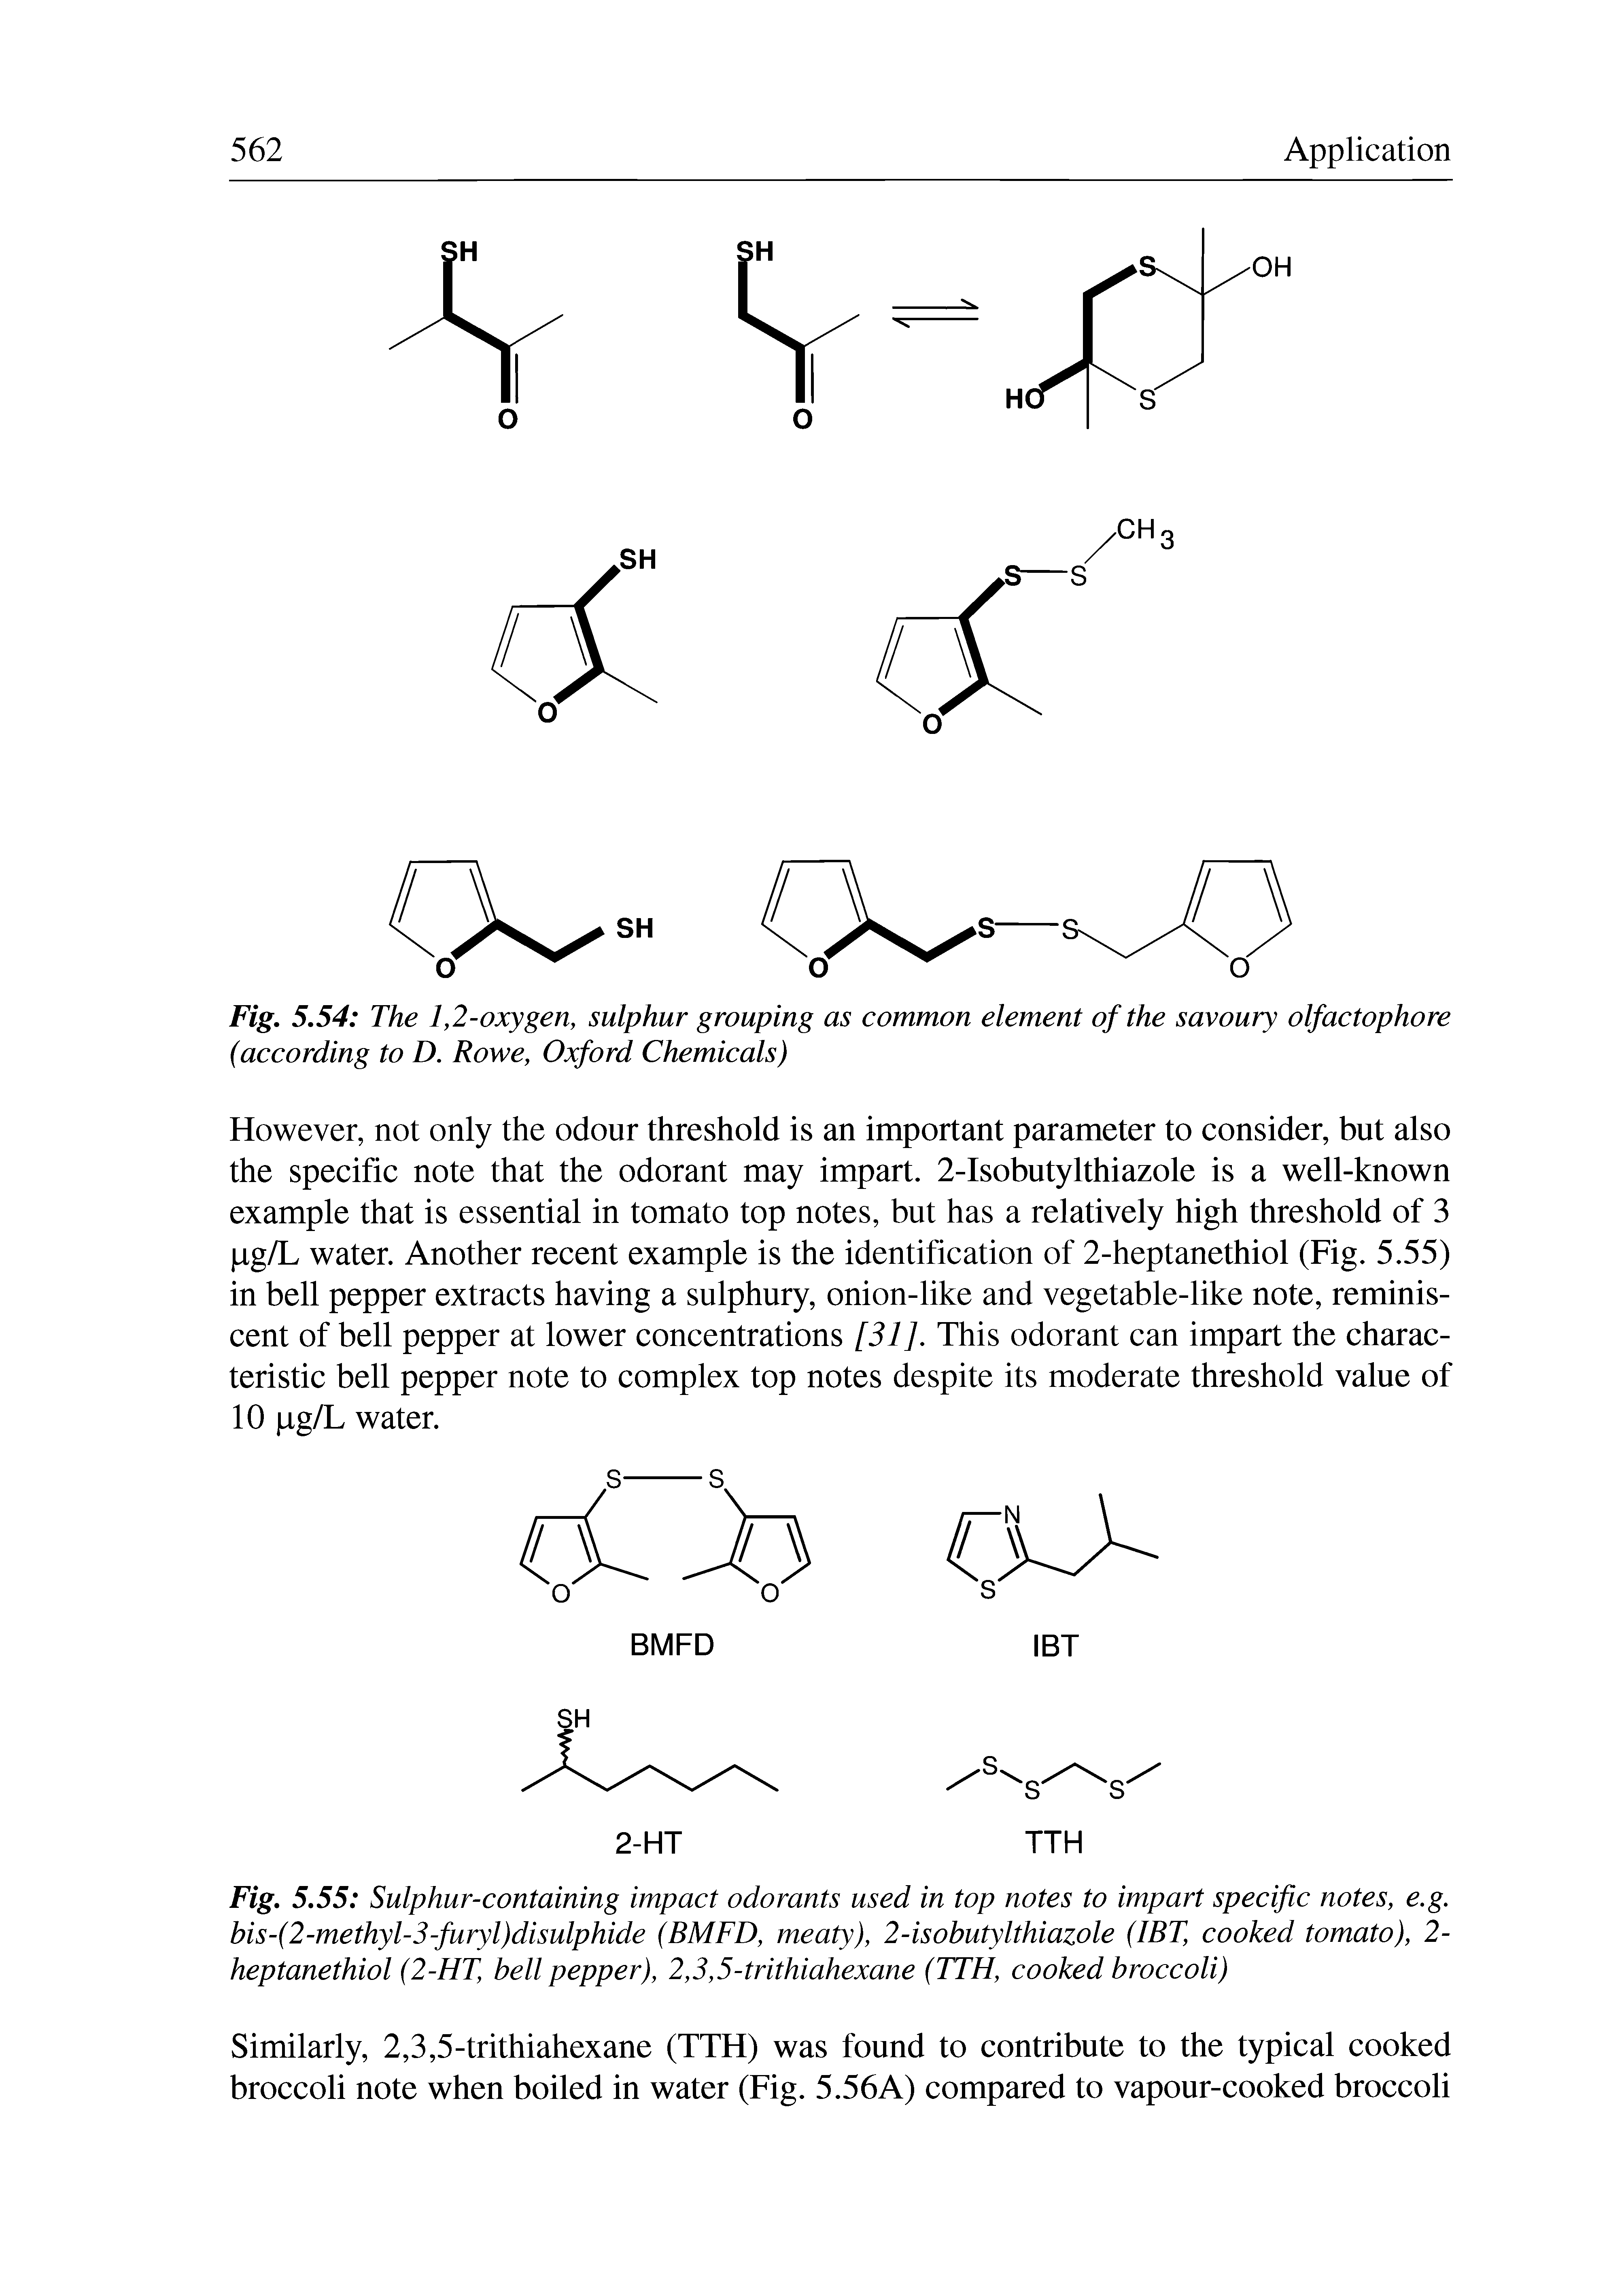 Fig. 5.55 Sulphur-containing impact odorants used in top notes to impart specific notes, e.g. bis-(2-methyl-3-furyl)disulphide (BMFD, meaty), 2-isobutylthiazole (IBT, cooked tomato), 2-heptanethiol (2-HT, bell pepper), 2,3,5-trithiahexane (TTH, cooked broccoli)...